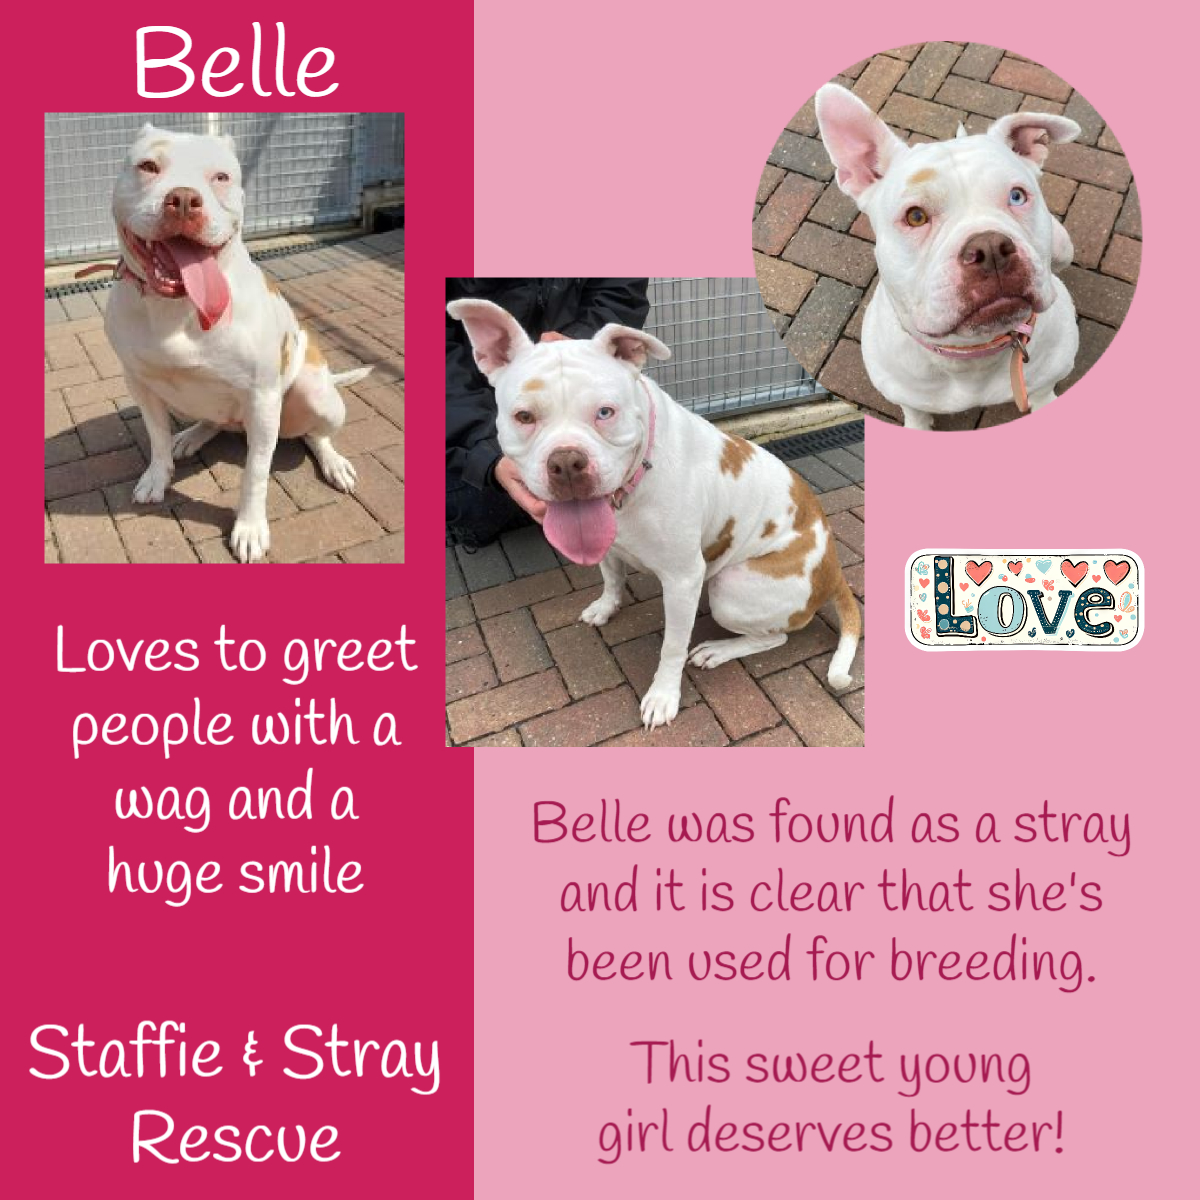 BELLE is around 18mo & was found as a stray. It is clear that she has been used for breeding in the past, but thankfully SSR were able to offer her a space to keep her safe & give her the chance of a new, happy life. She is now searching for a FOSTER or FOREVER home. 🙏 Belle